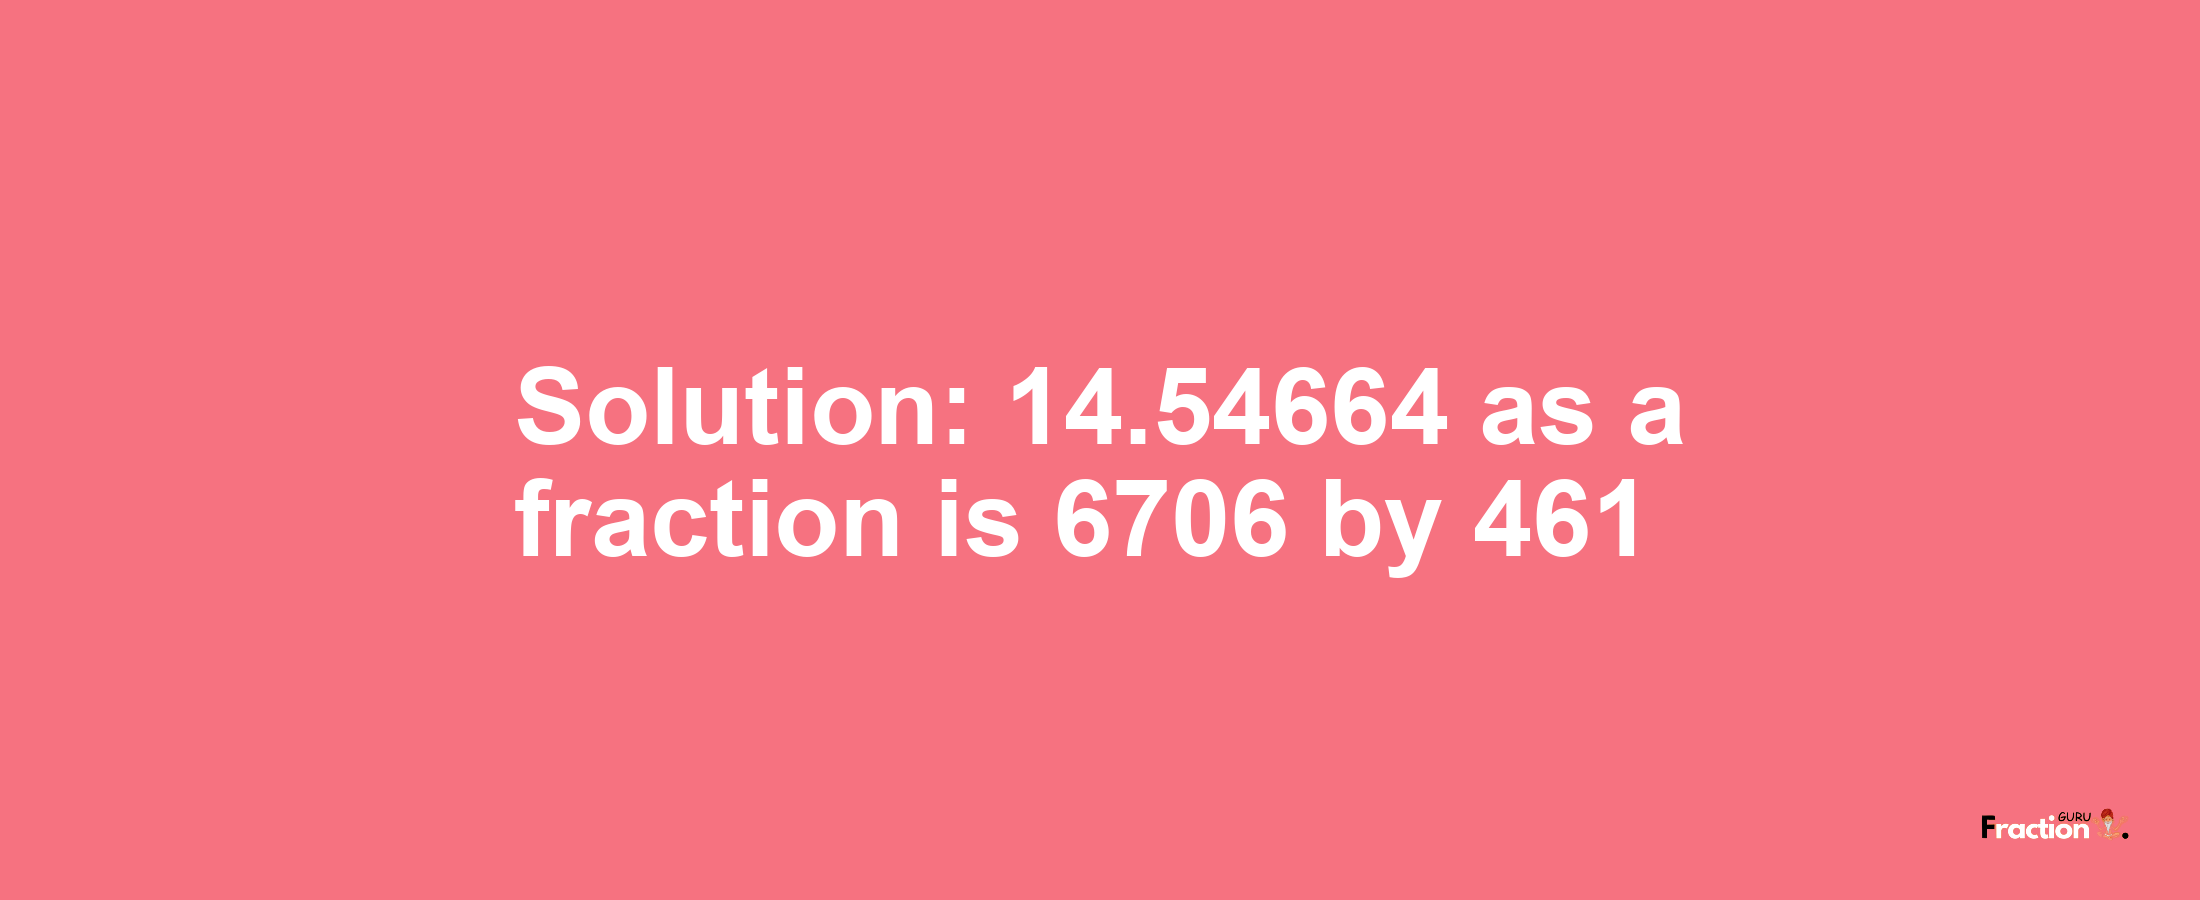 Solution:14.54664 as a fraction is 6706/461